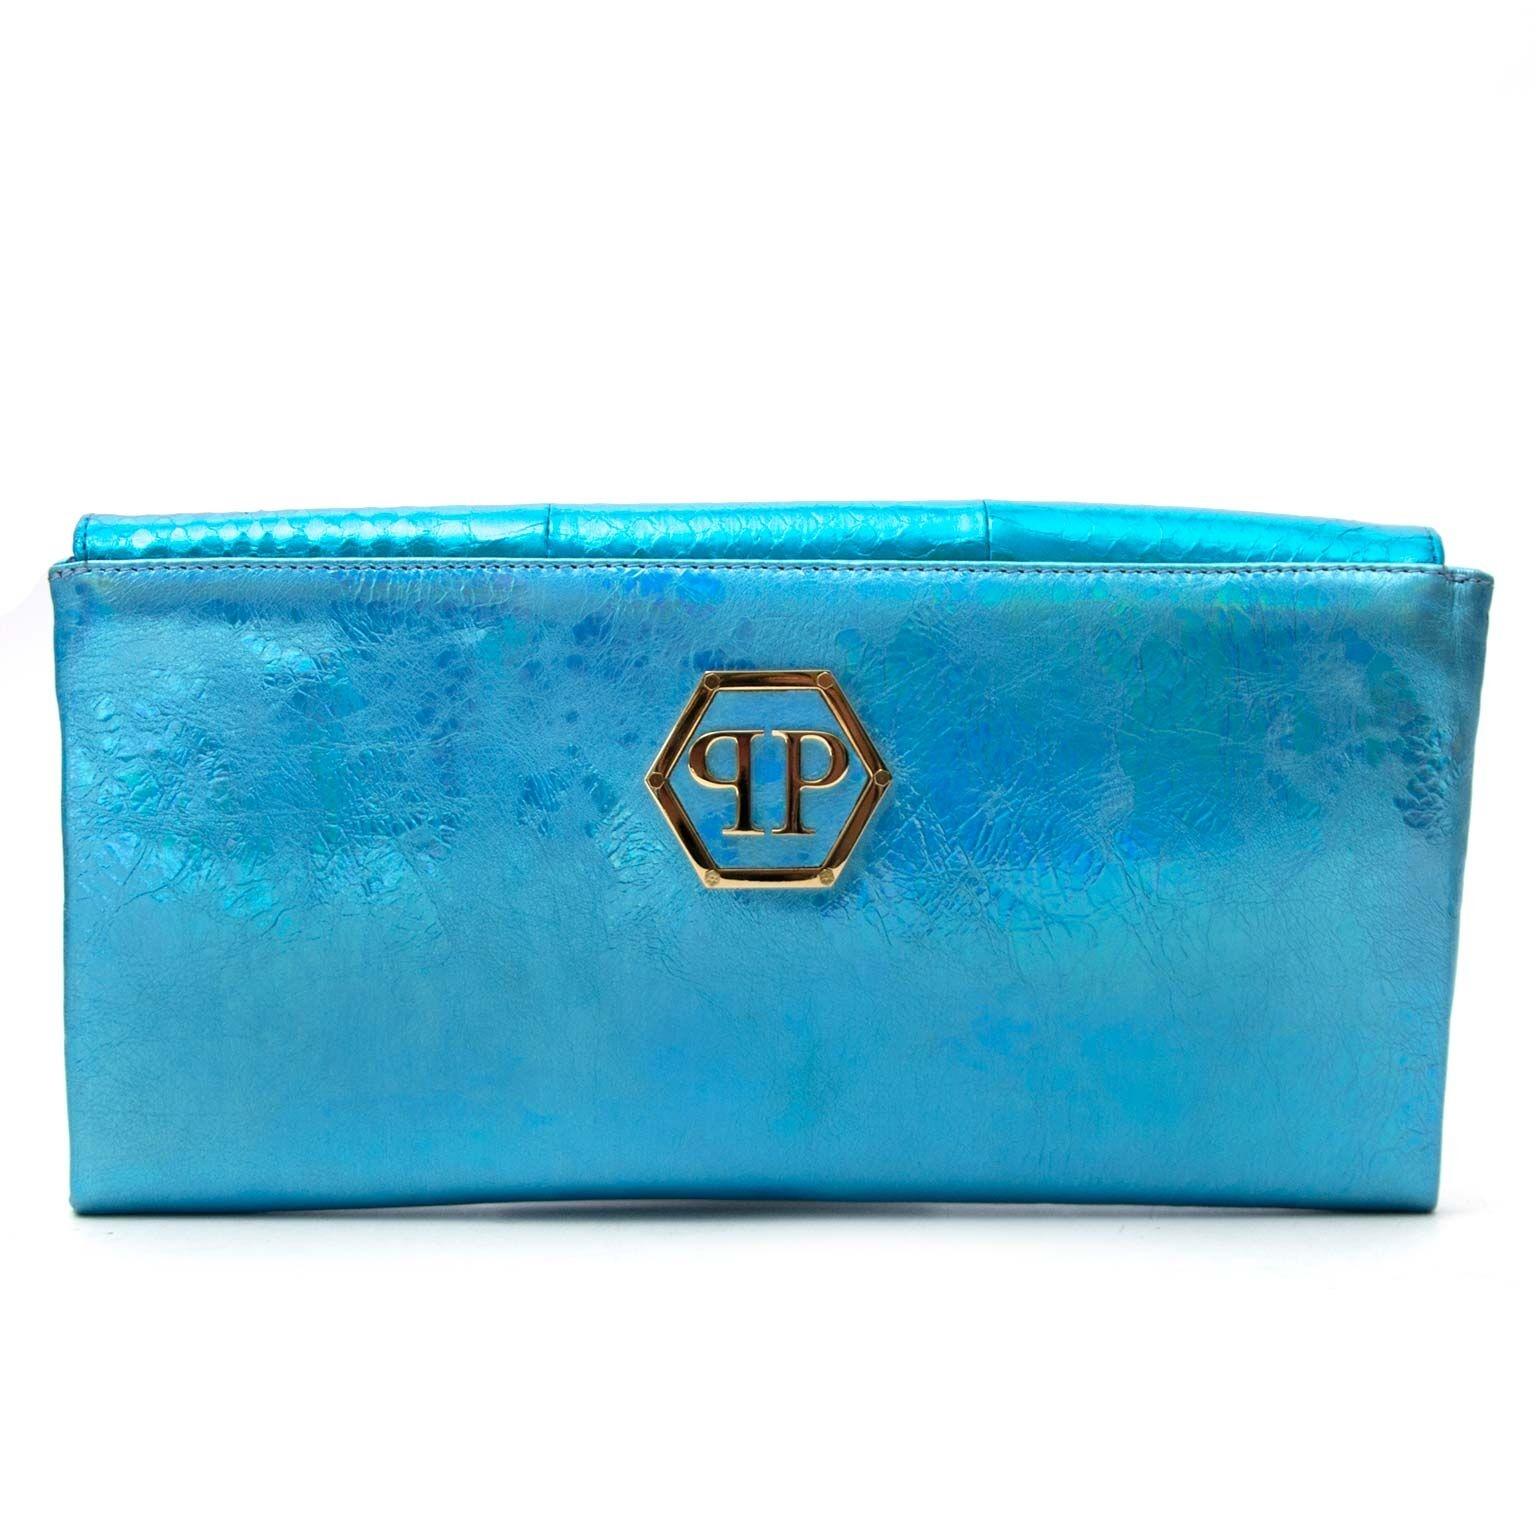 Excellent condition

Philipp Plein Metallic Blue Clutch

Be the star of the night with this real statement piece! The bright metallic blue will WOW everyone. 
The clutch closes with a magnetic closure and is finished with bright shiny stones. 
The